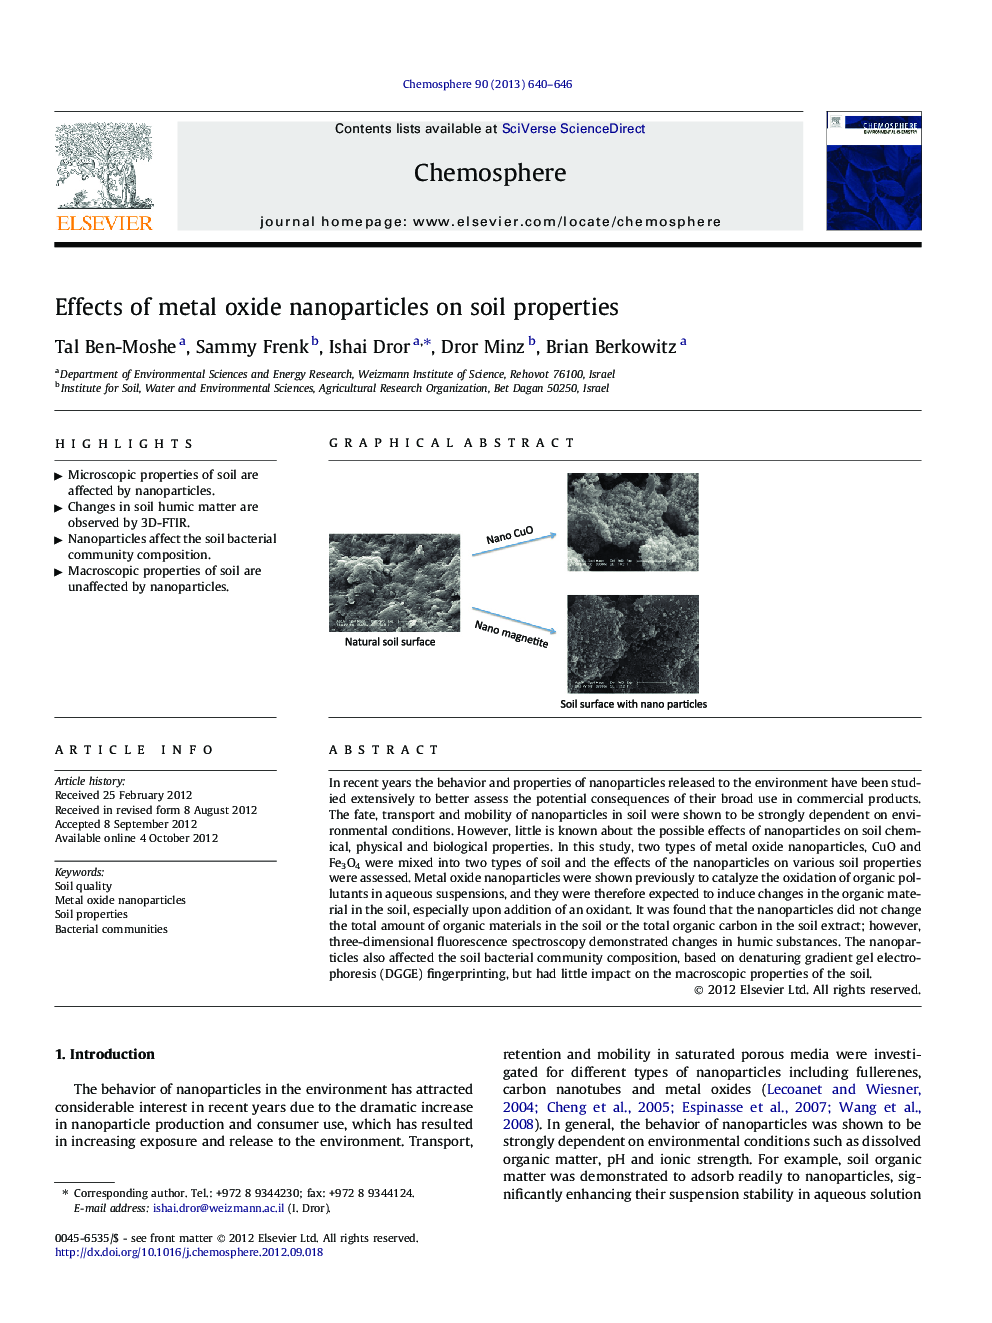 Effects of metal oxide nanoparticles on soil properties